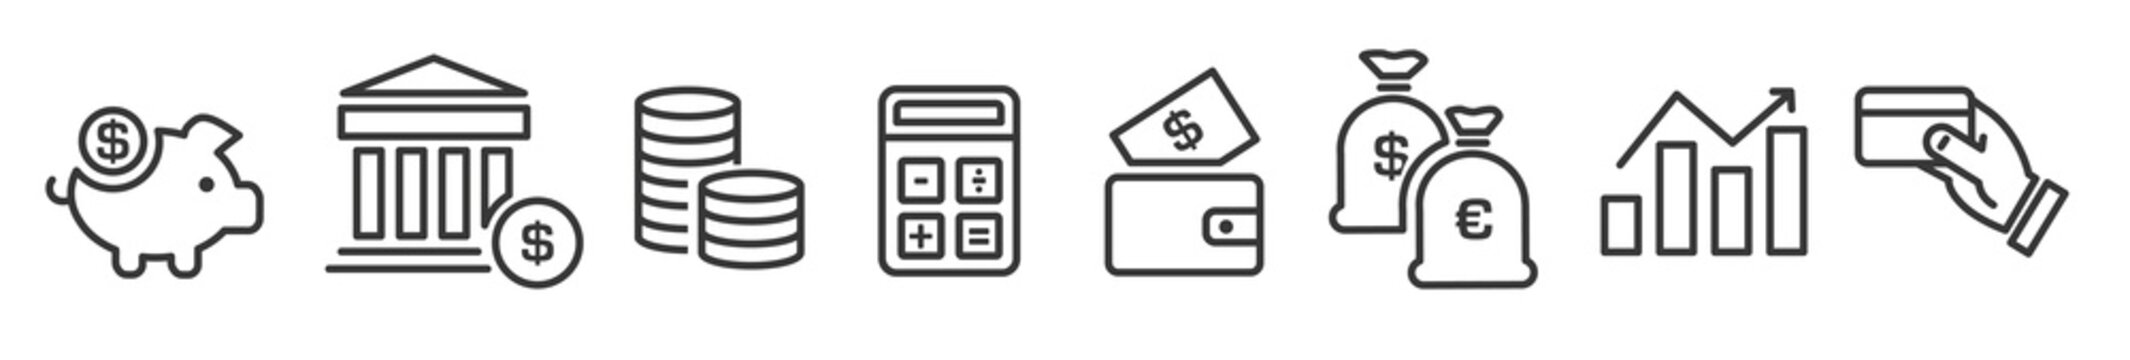 Set of financial line icons on white backround